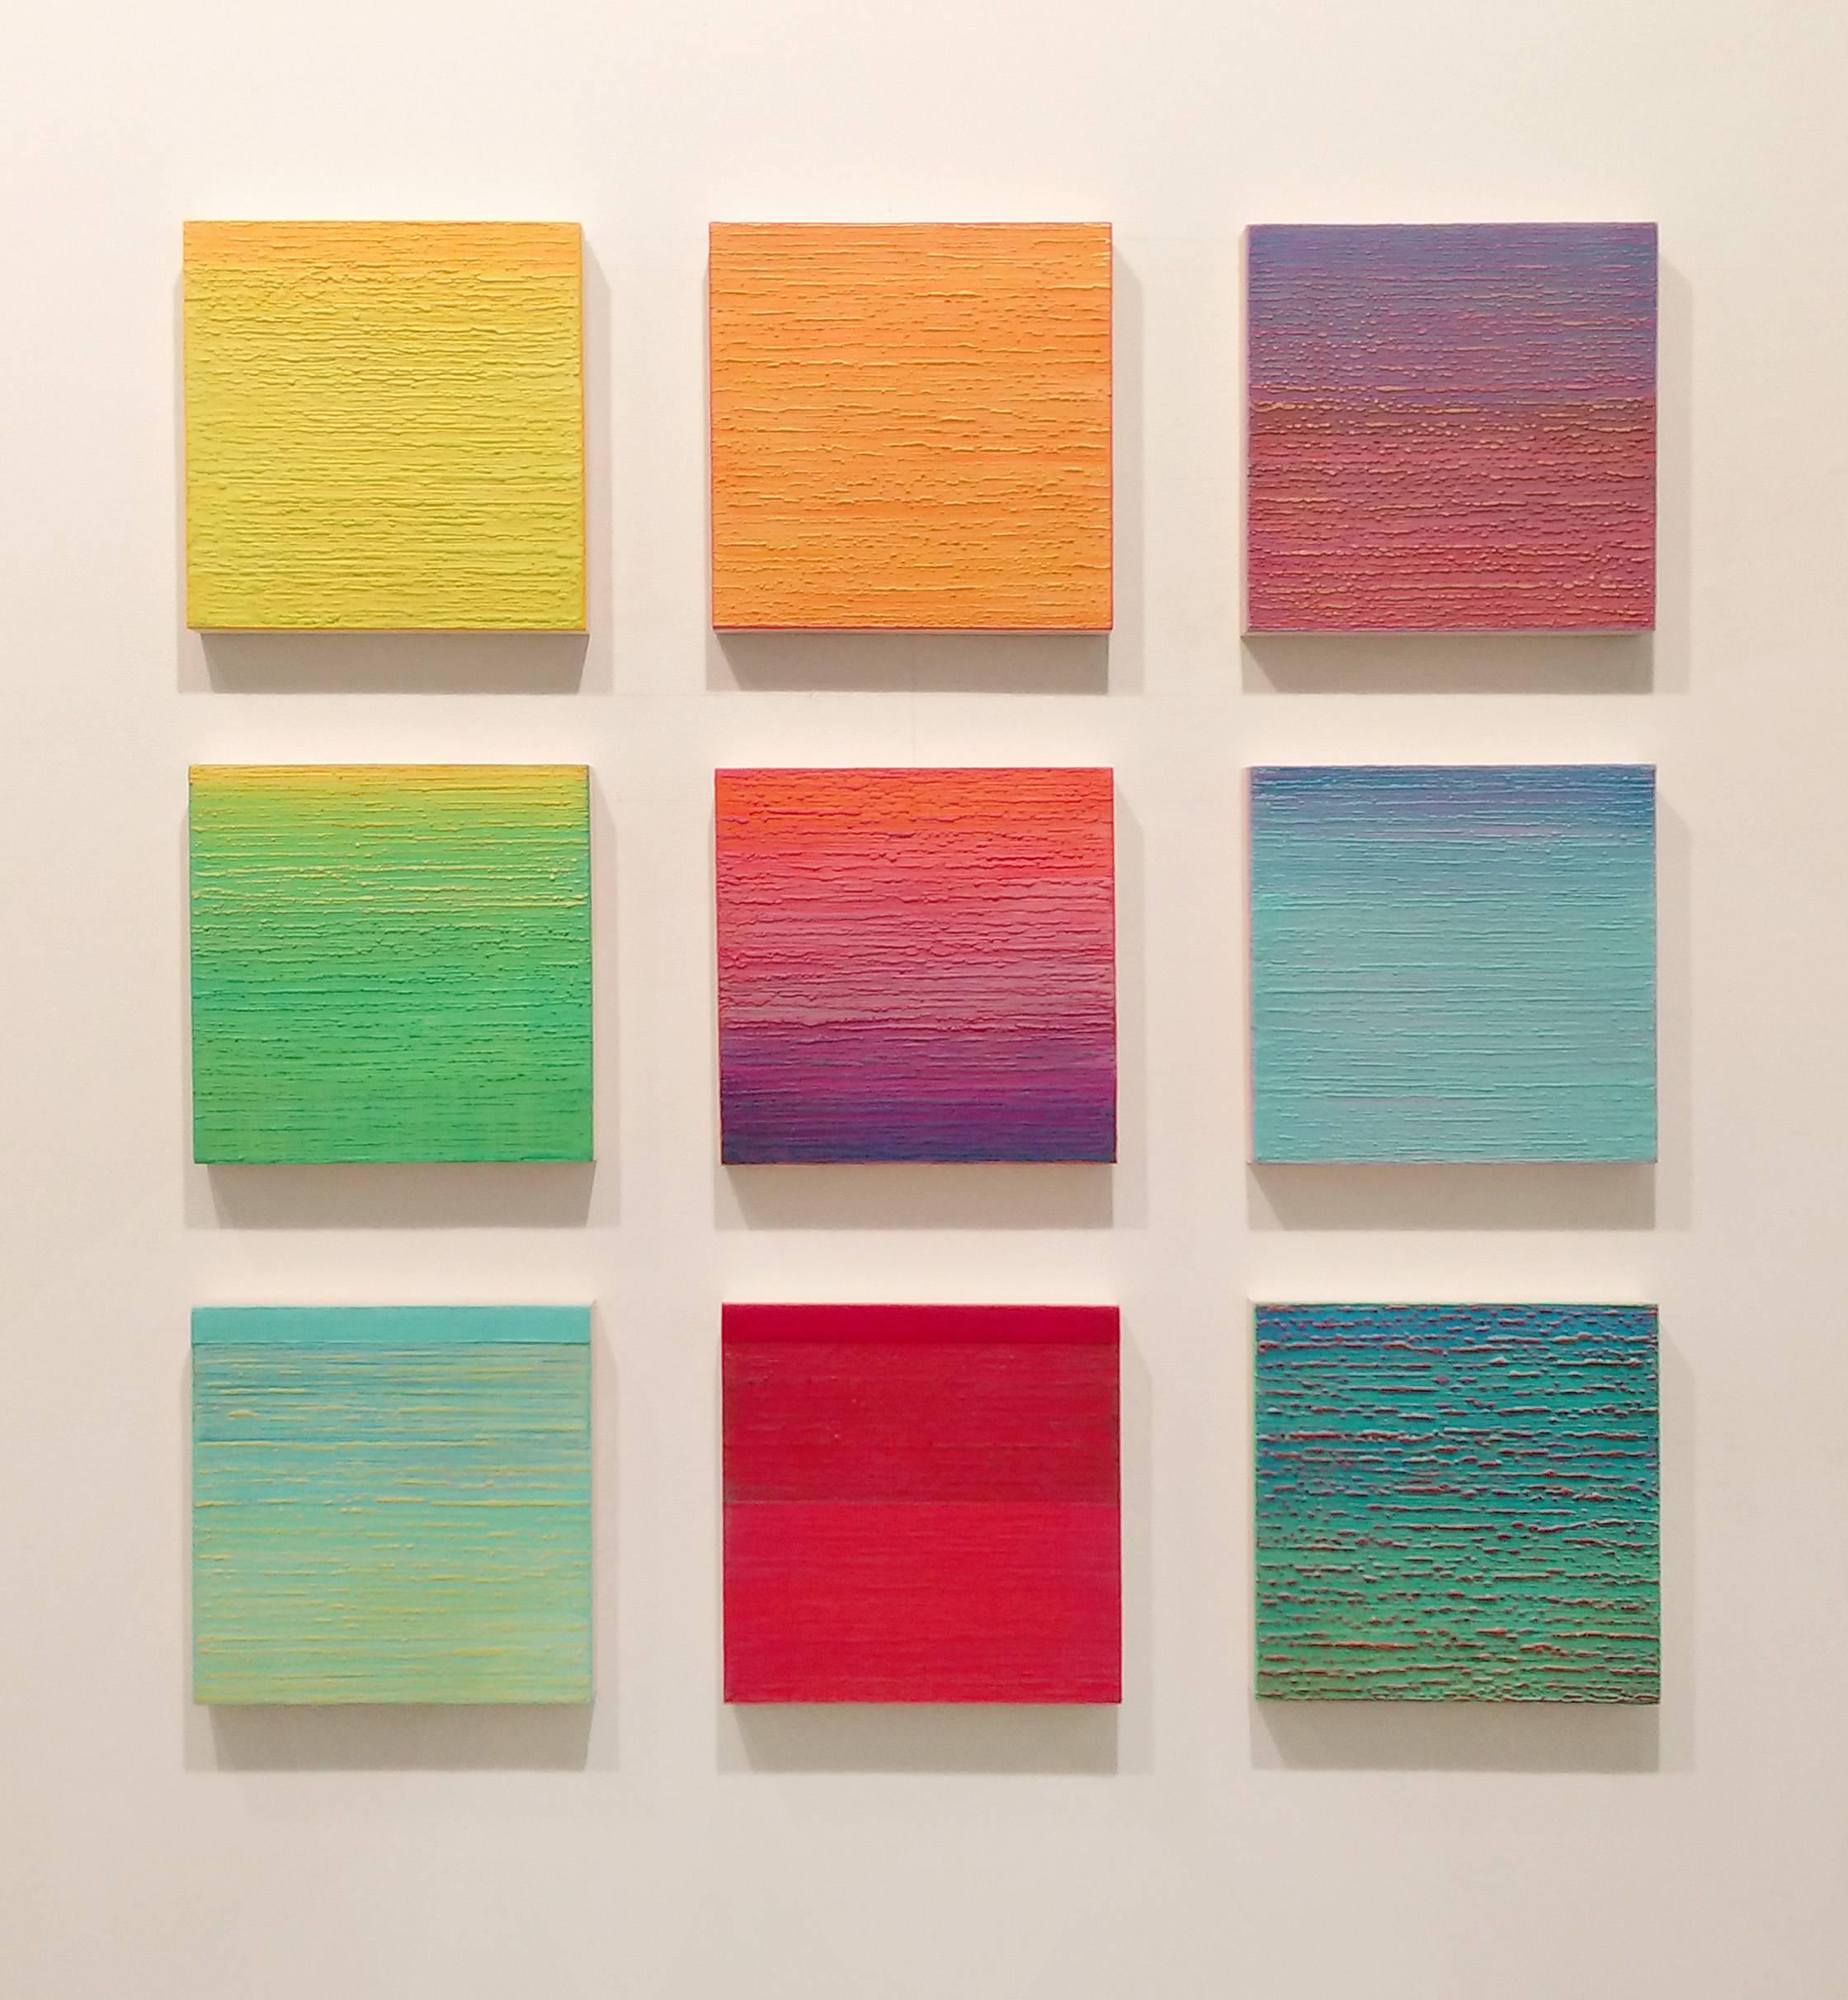 Joanne Mattera's Silk Road 360 is red.

Succulent in color and reductive or repetitive in composition, Joanne Mattera’s ongoing Silk Road series of paintings are achieved by manipulating layers of translucent wax and pigments applied at right